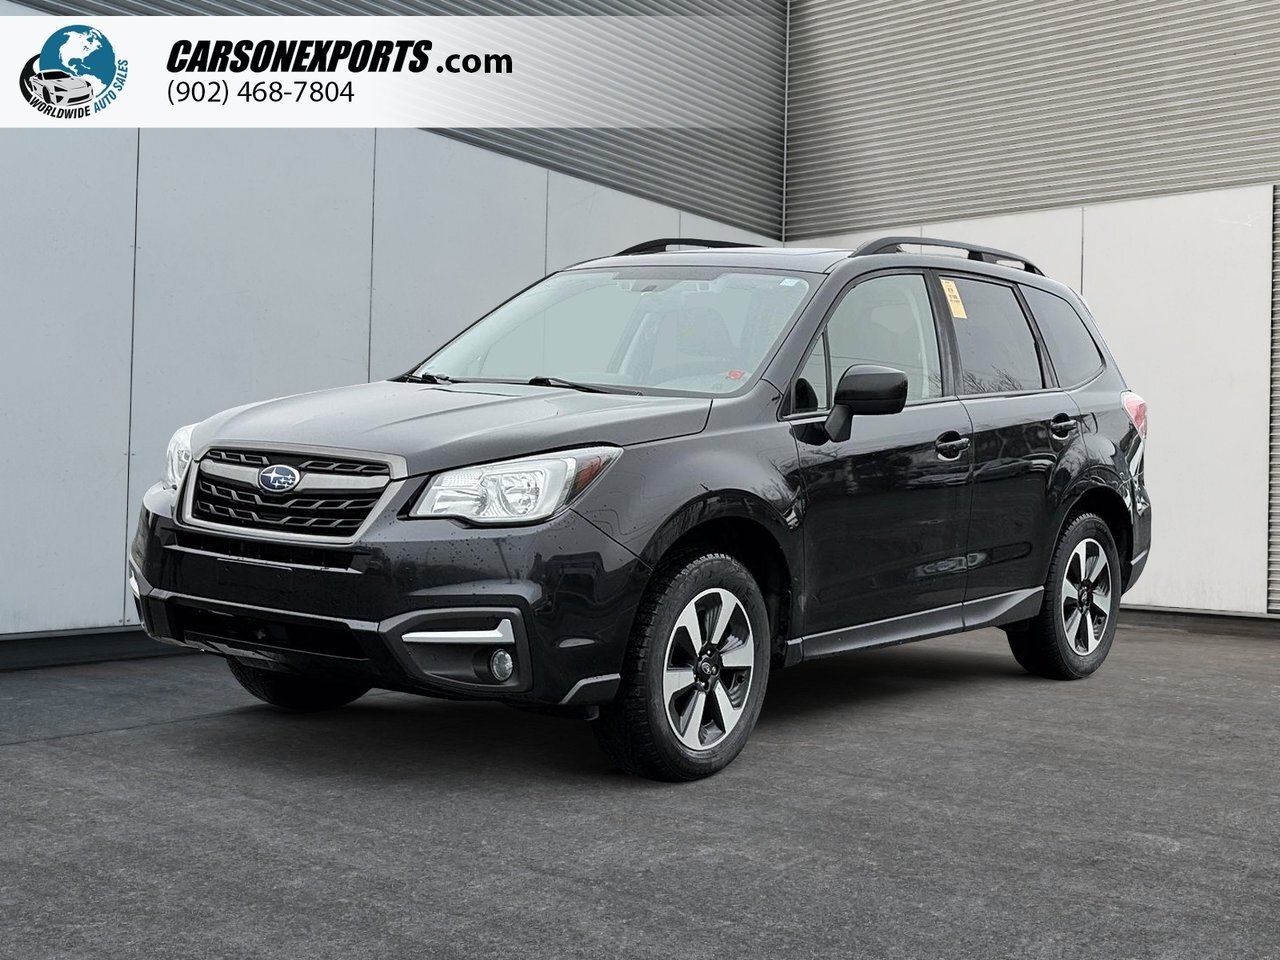 2018 Subaru Forester 2.5i Touring The best place to buy a used car. Per